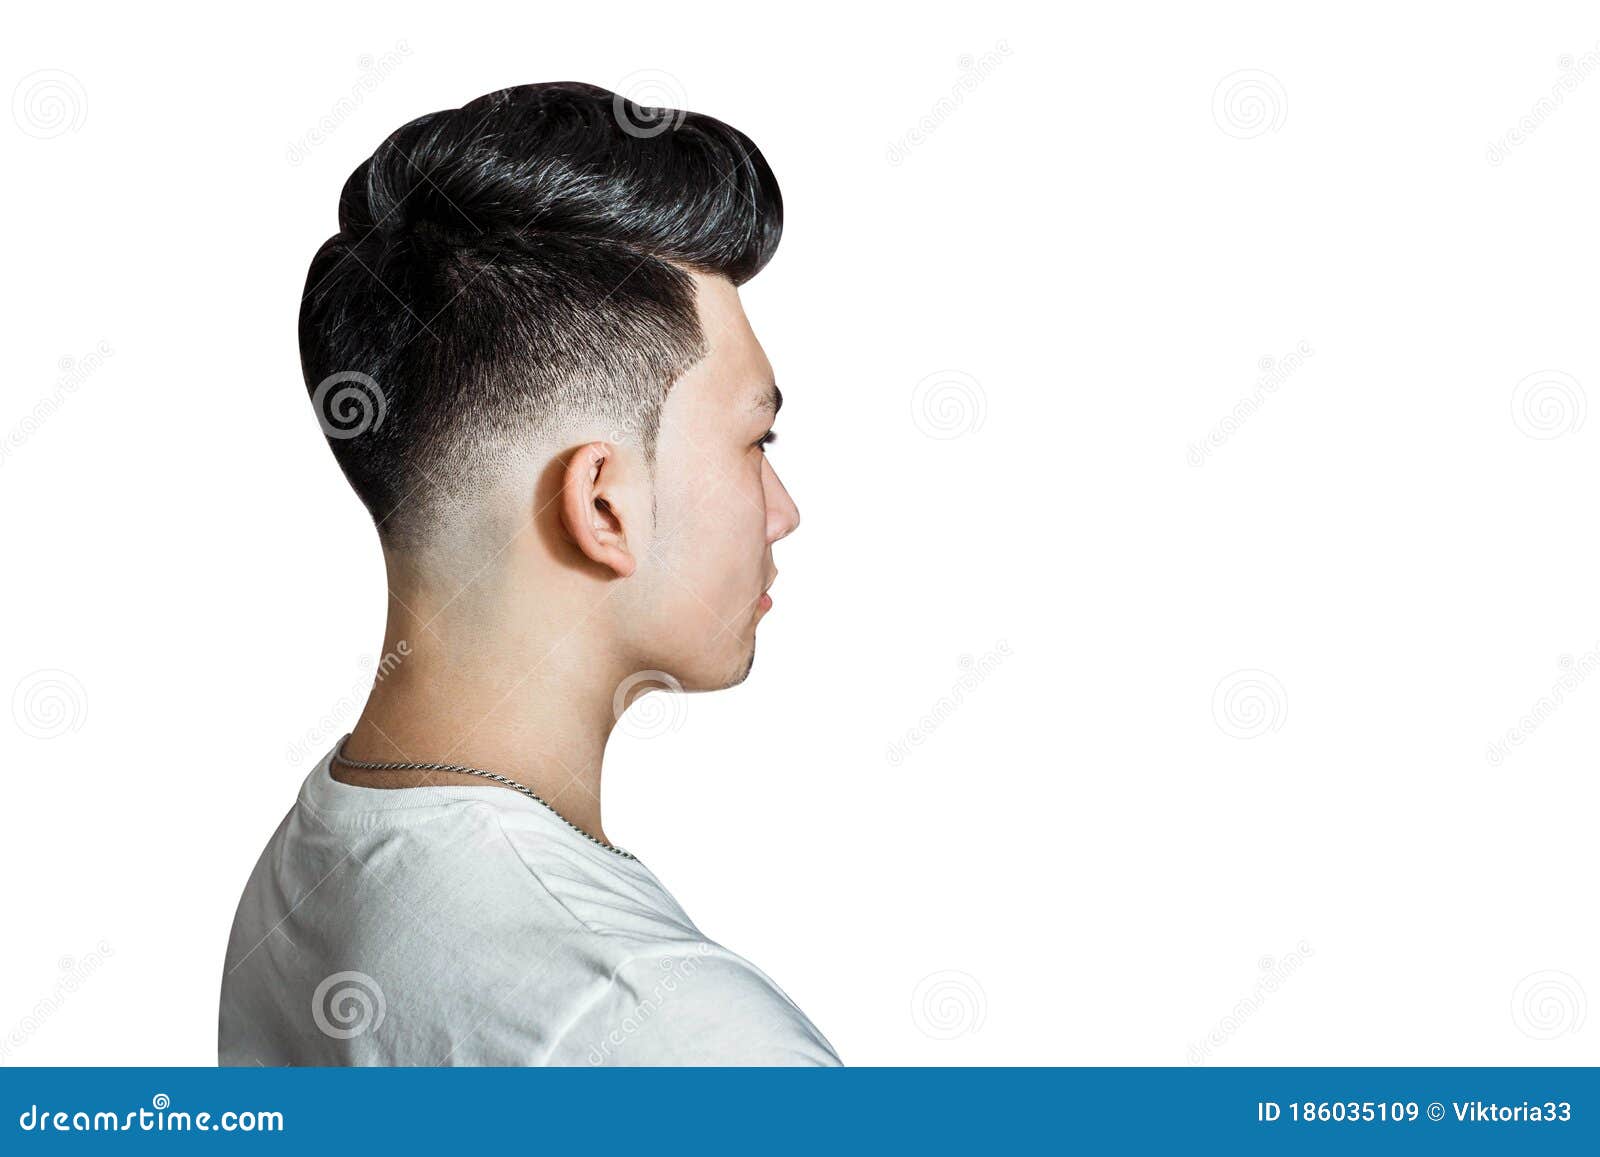 Young Guy Brunette with Pompadour Volume Haircut 50s - 60s. Real Photo Retro  Hair Style Side, for Barbershop, Isolated Stock Image - Image of model,  face: 186035109